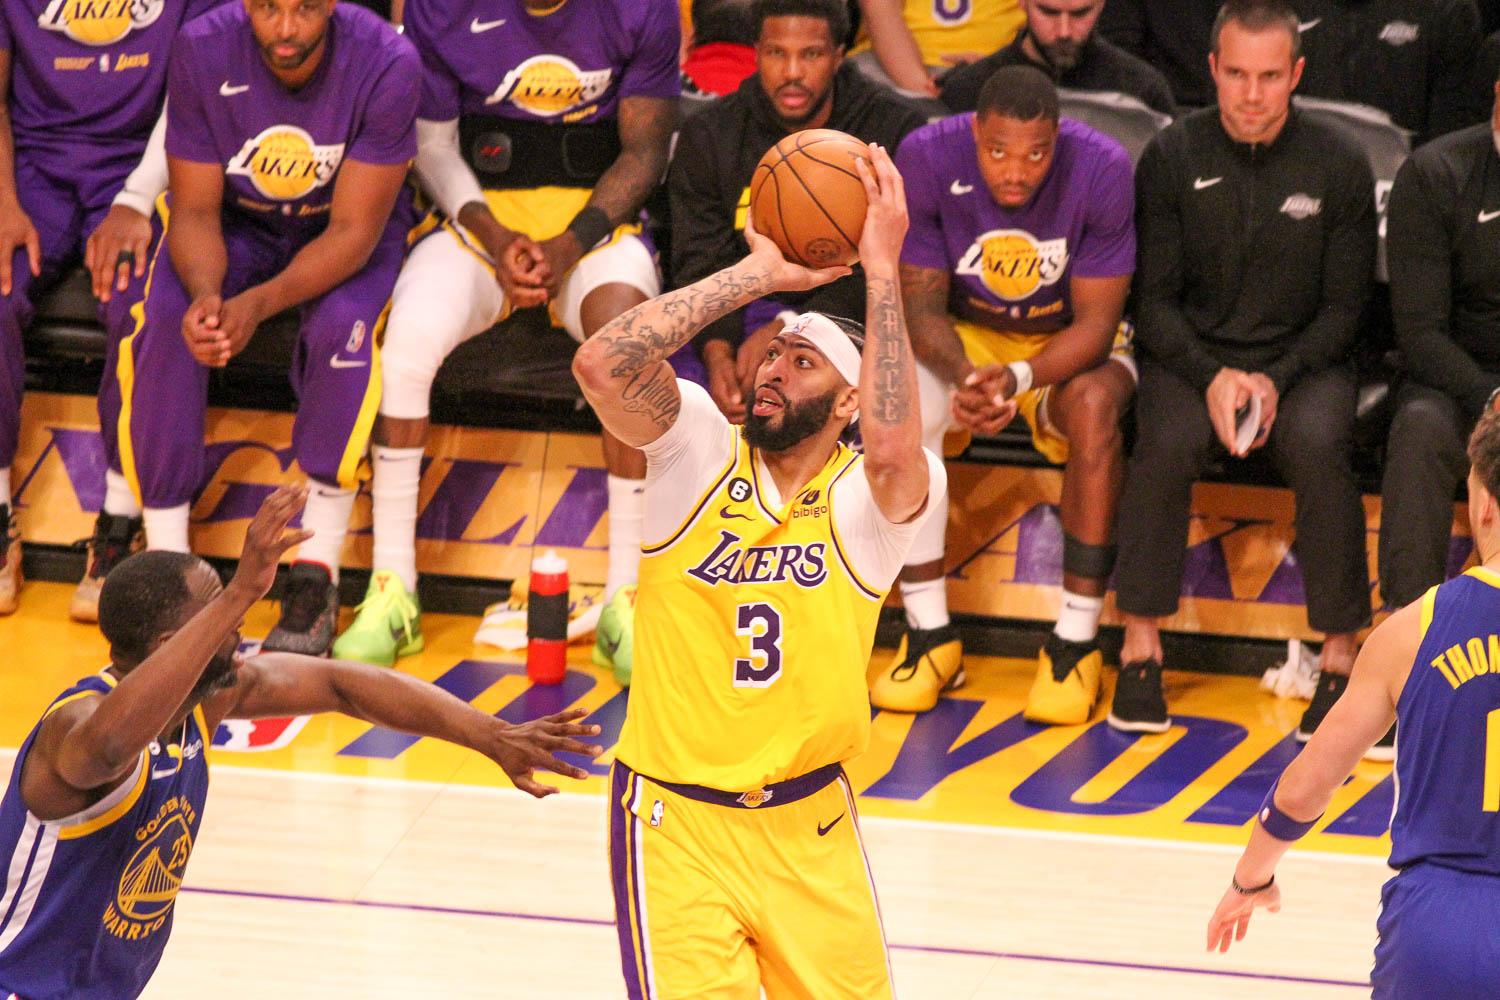 Lakers forward Anthony Davis scored 23 points and produced 15 rebounds in the team's 104-101 win against the Golden State Warriors at Crypto.com Arena on May 8, 2023. Photo by Dennis J. Freeman for News4usonline 